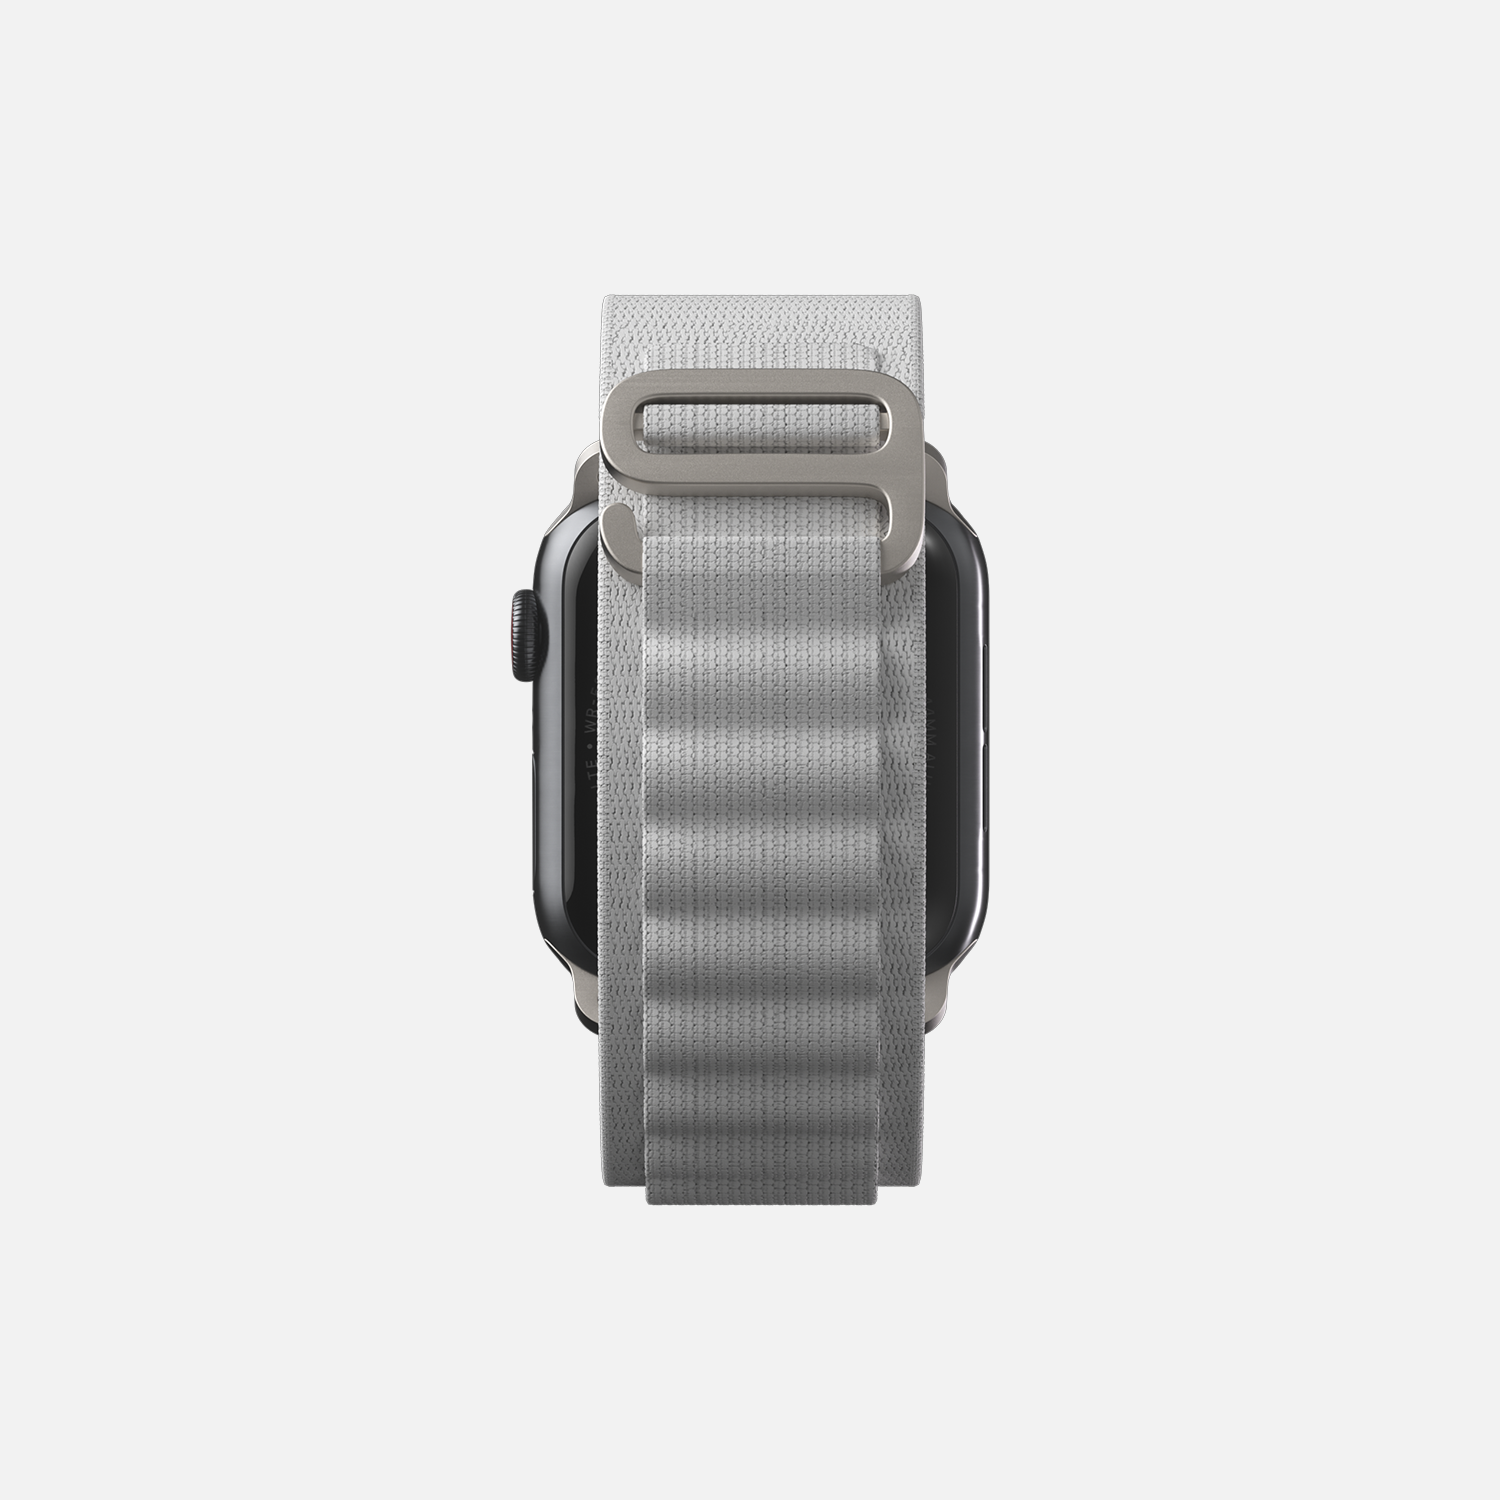 Rear view of a silver smartwatch with woven nylon band on white background.